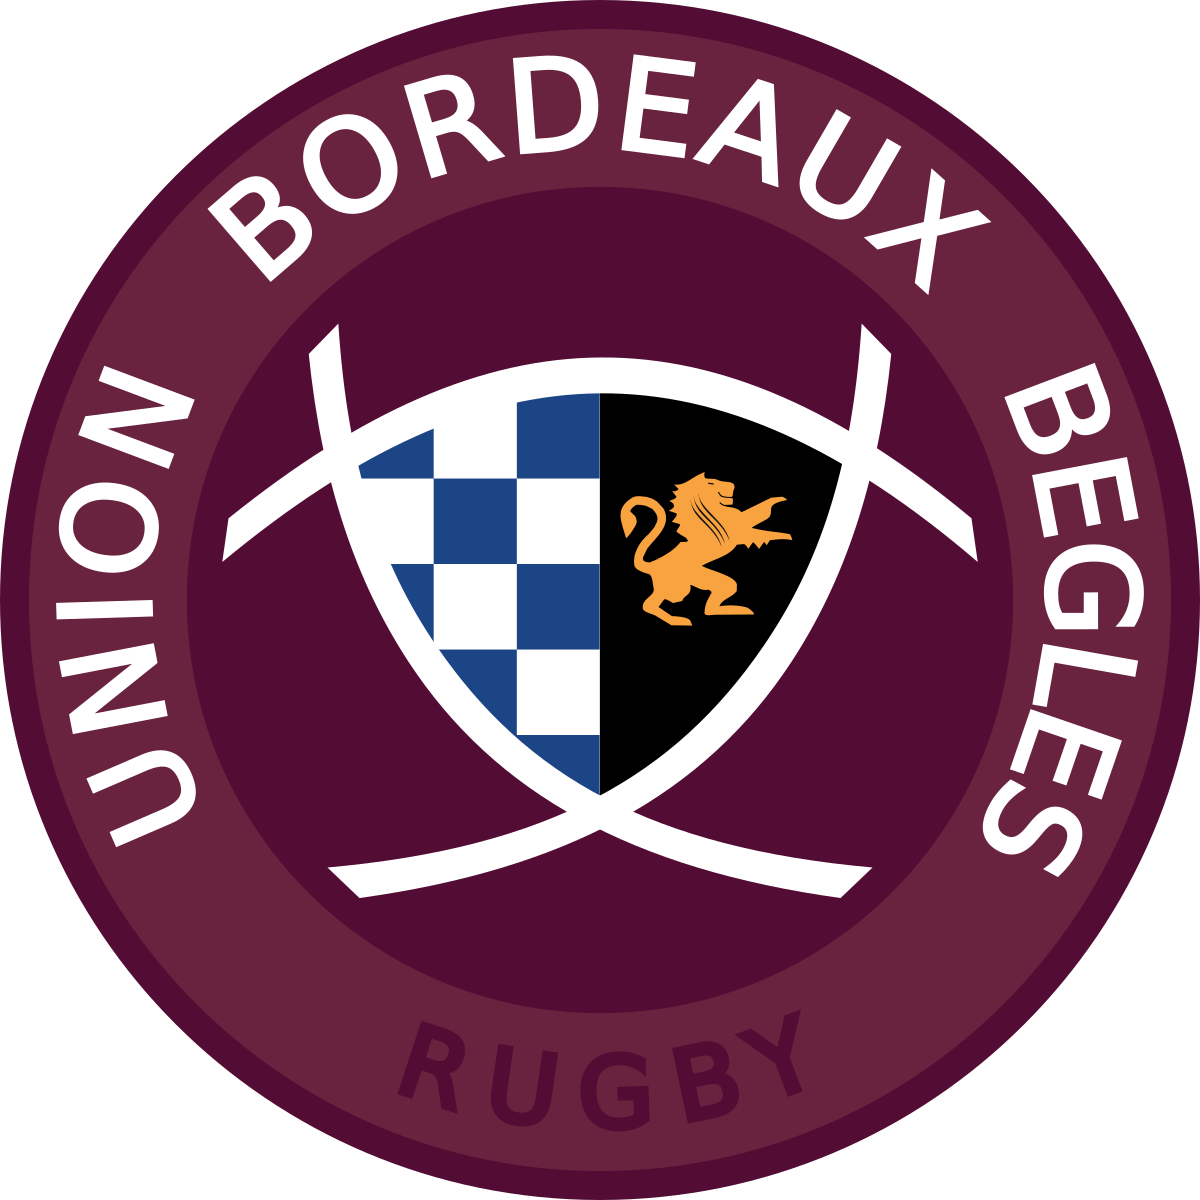 You are currently viewing UBB Union Bordeaux Bègles